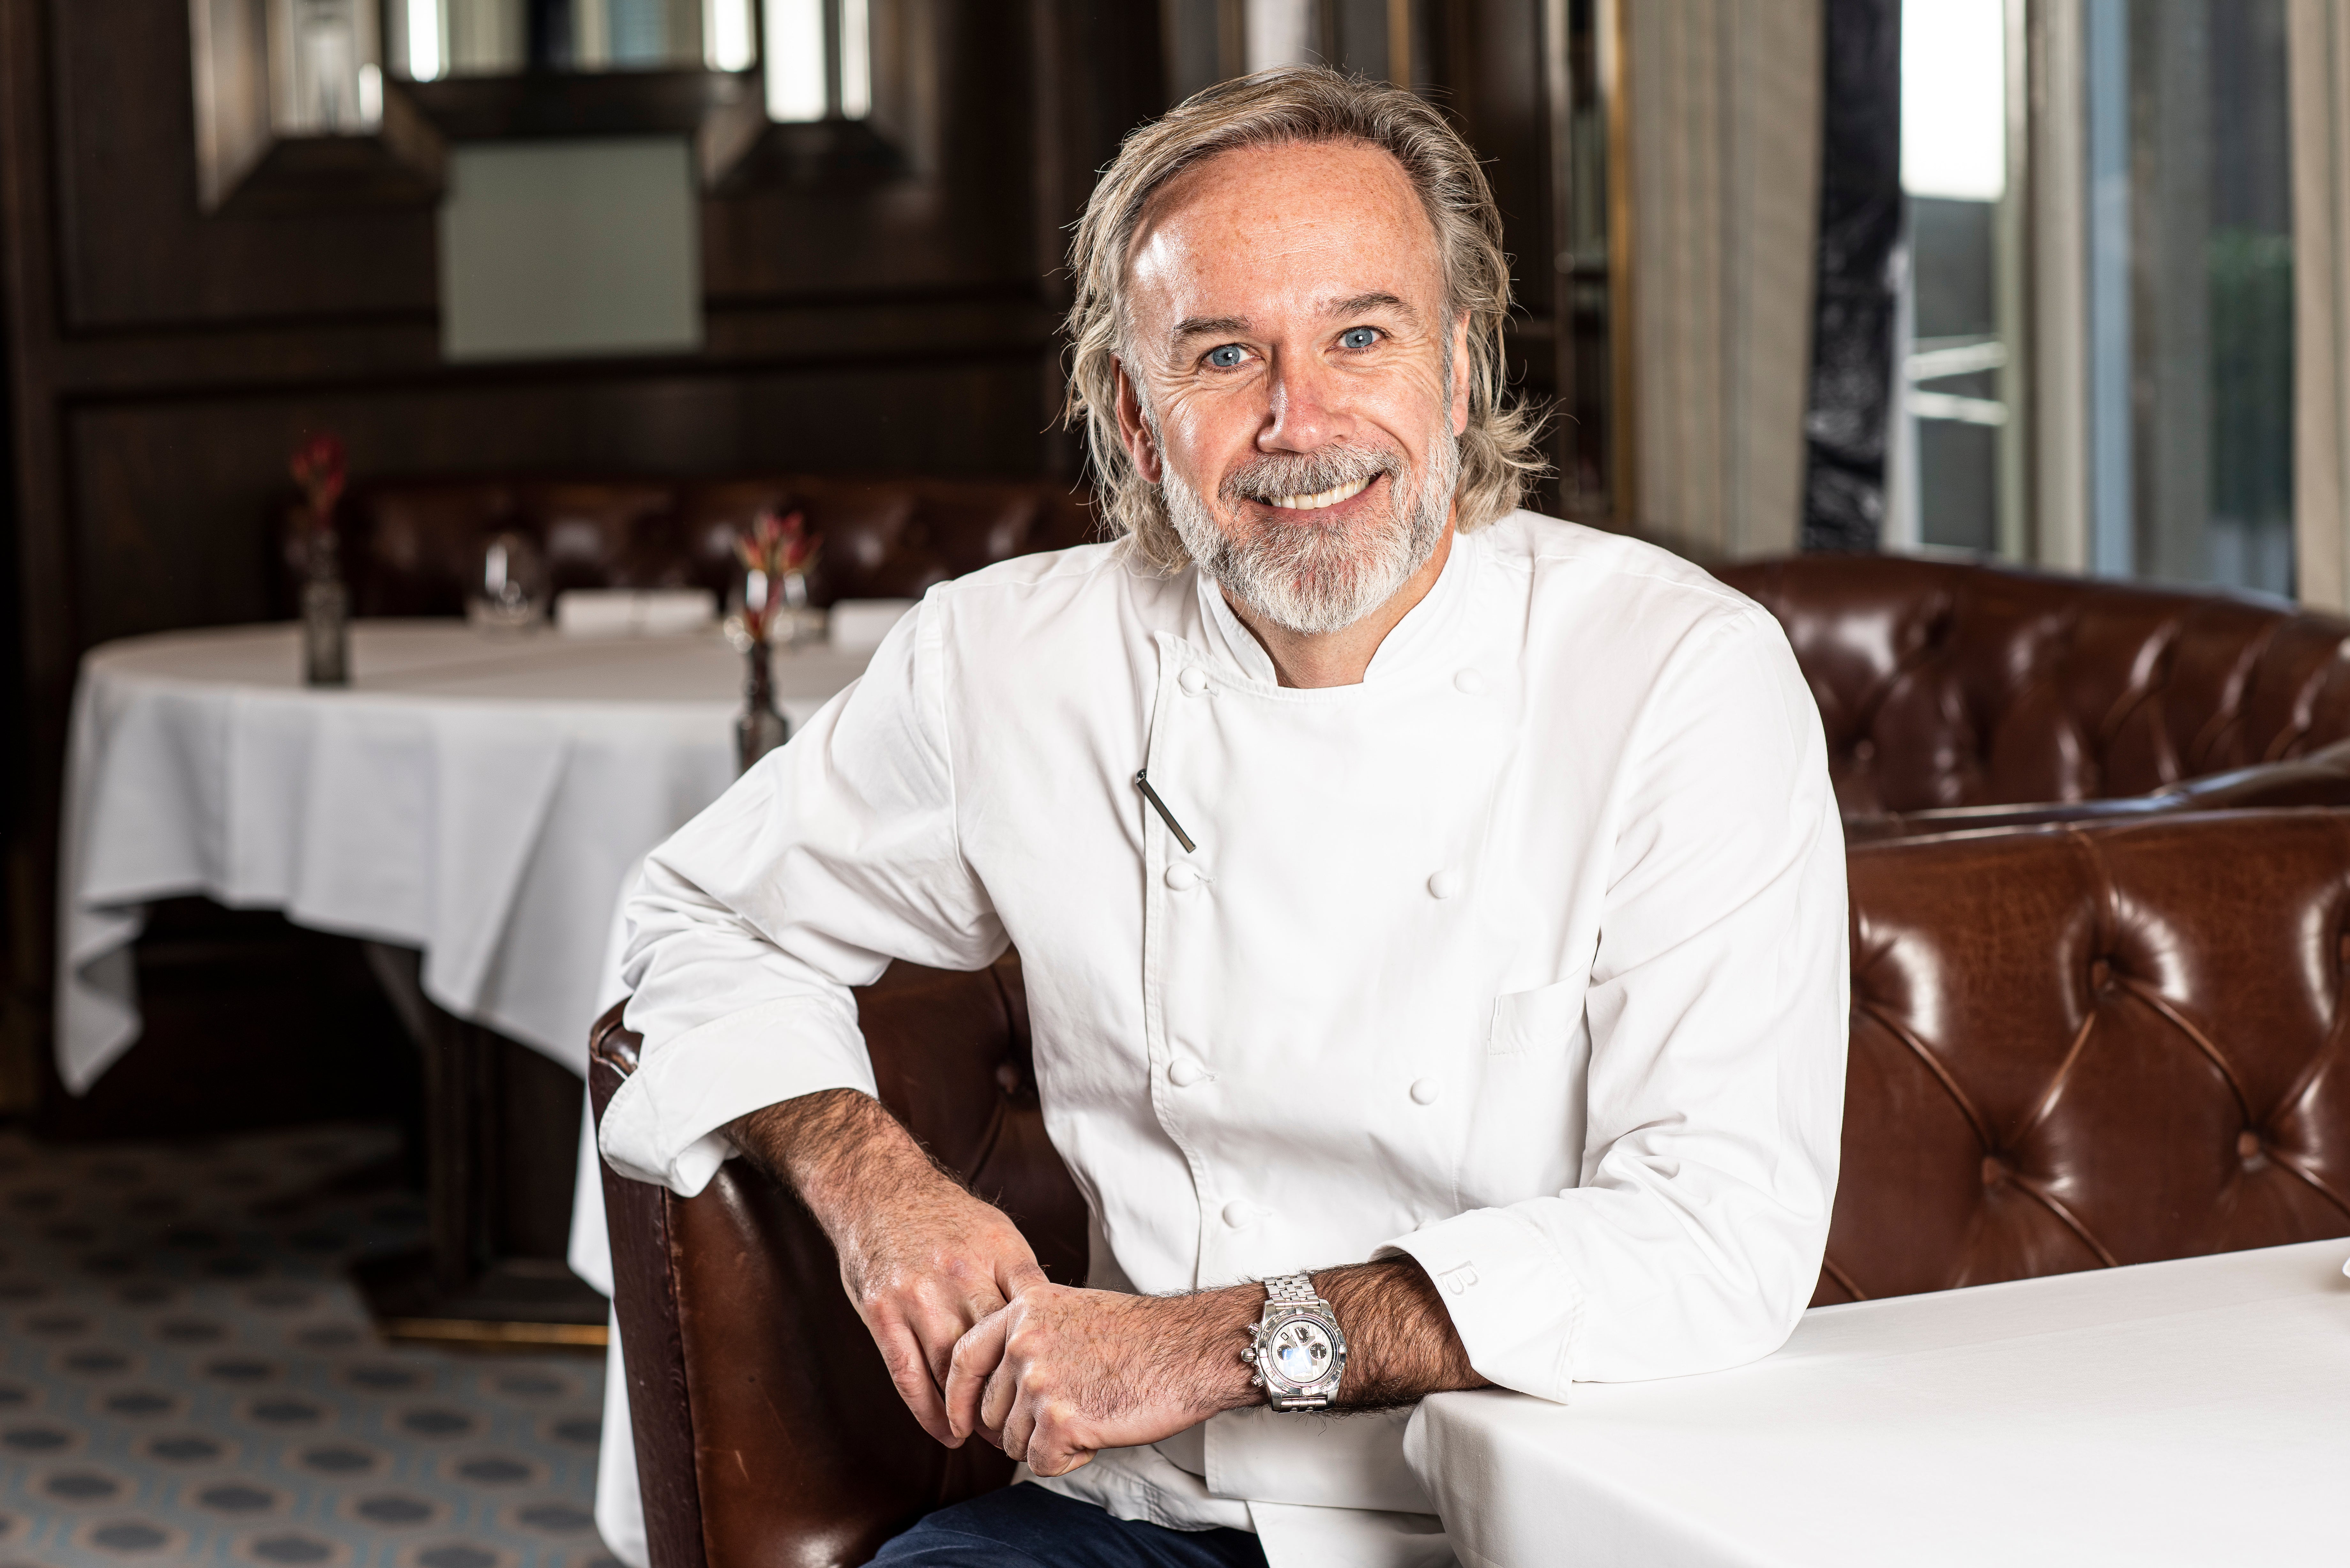 Marcus Wareing at his restaurant in The Berkeley Hotel, London